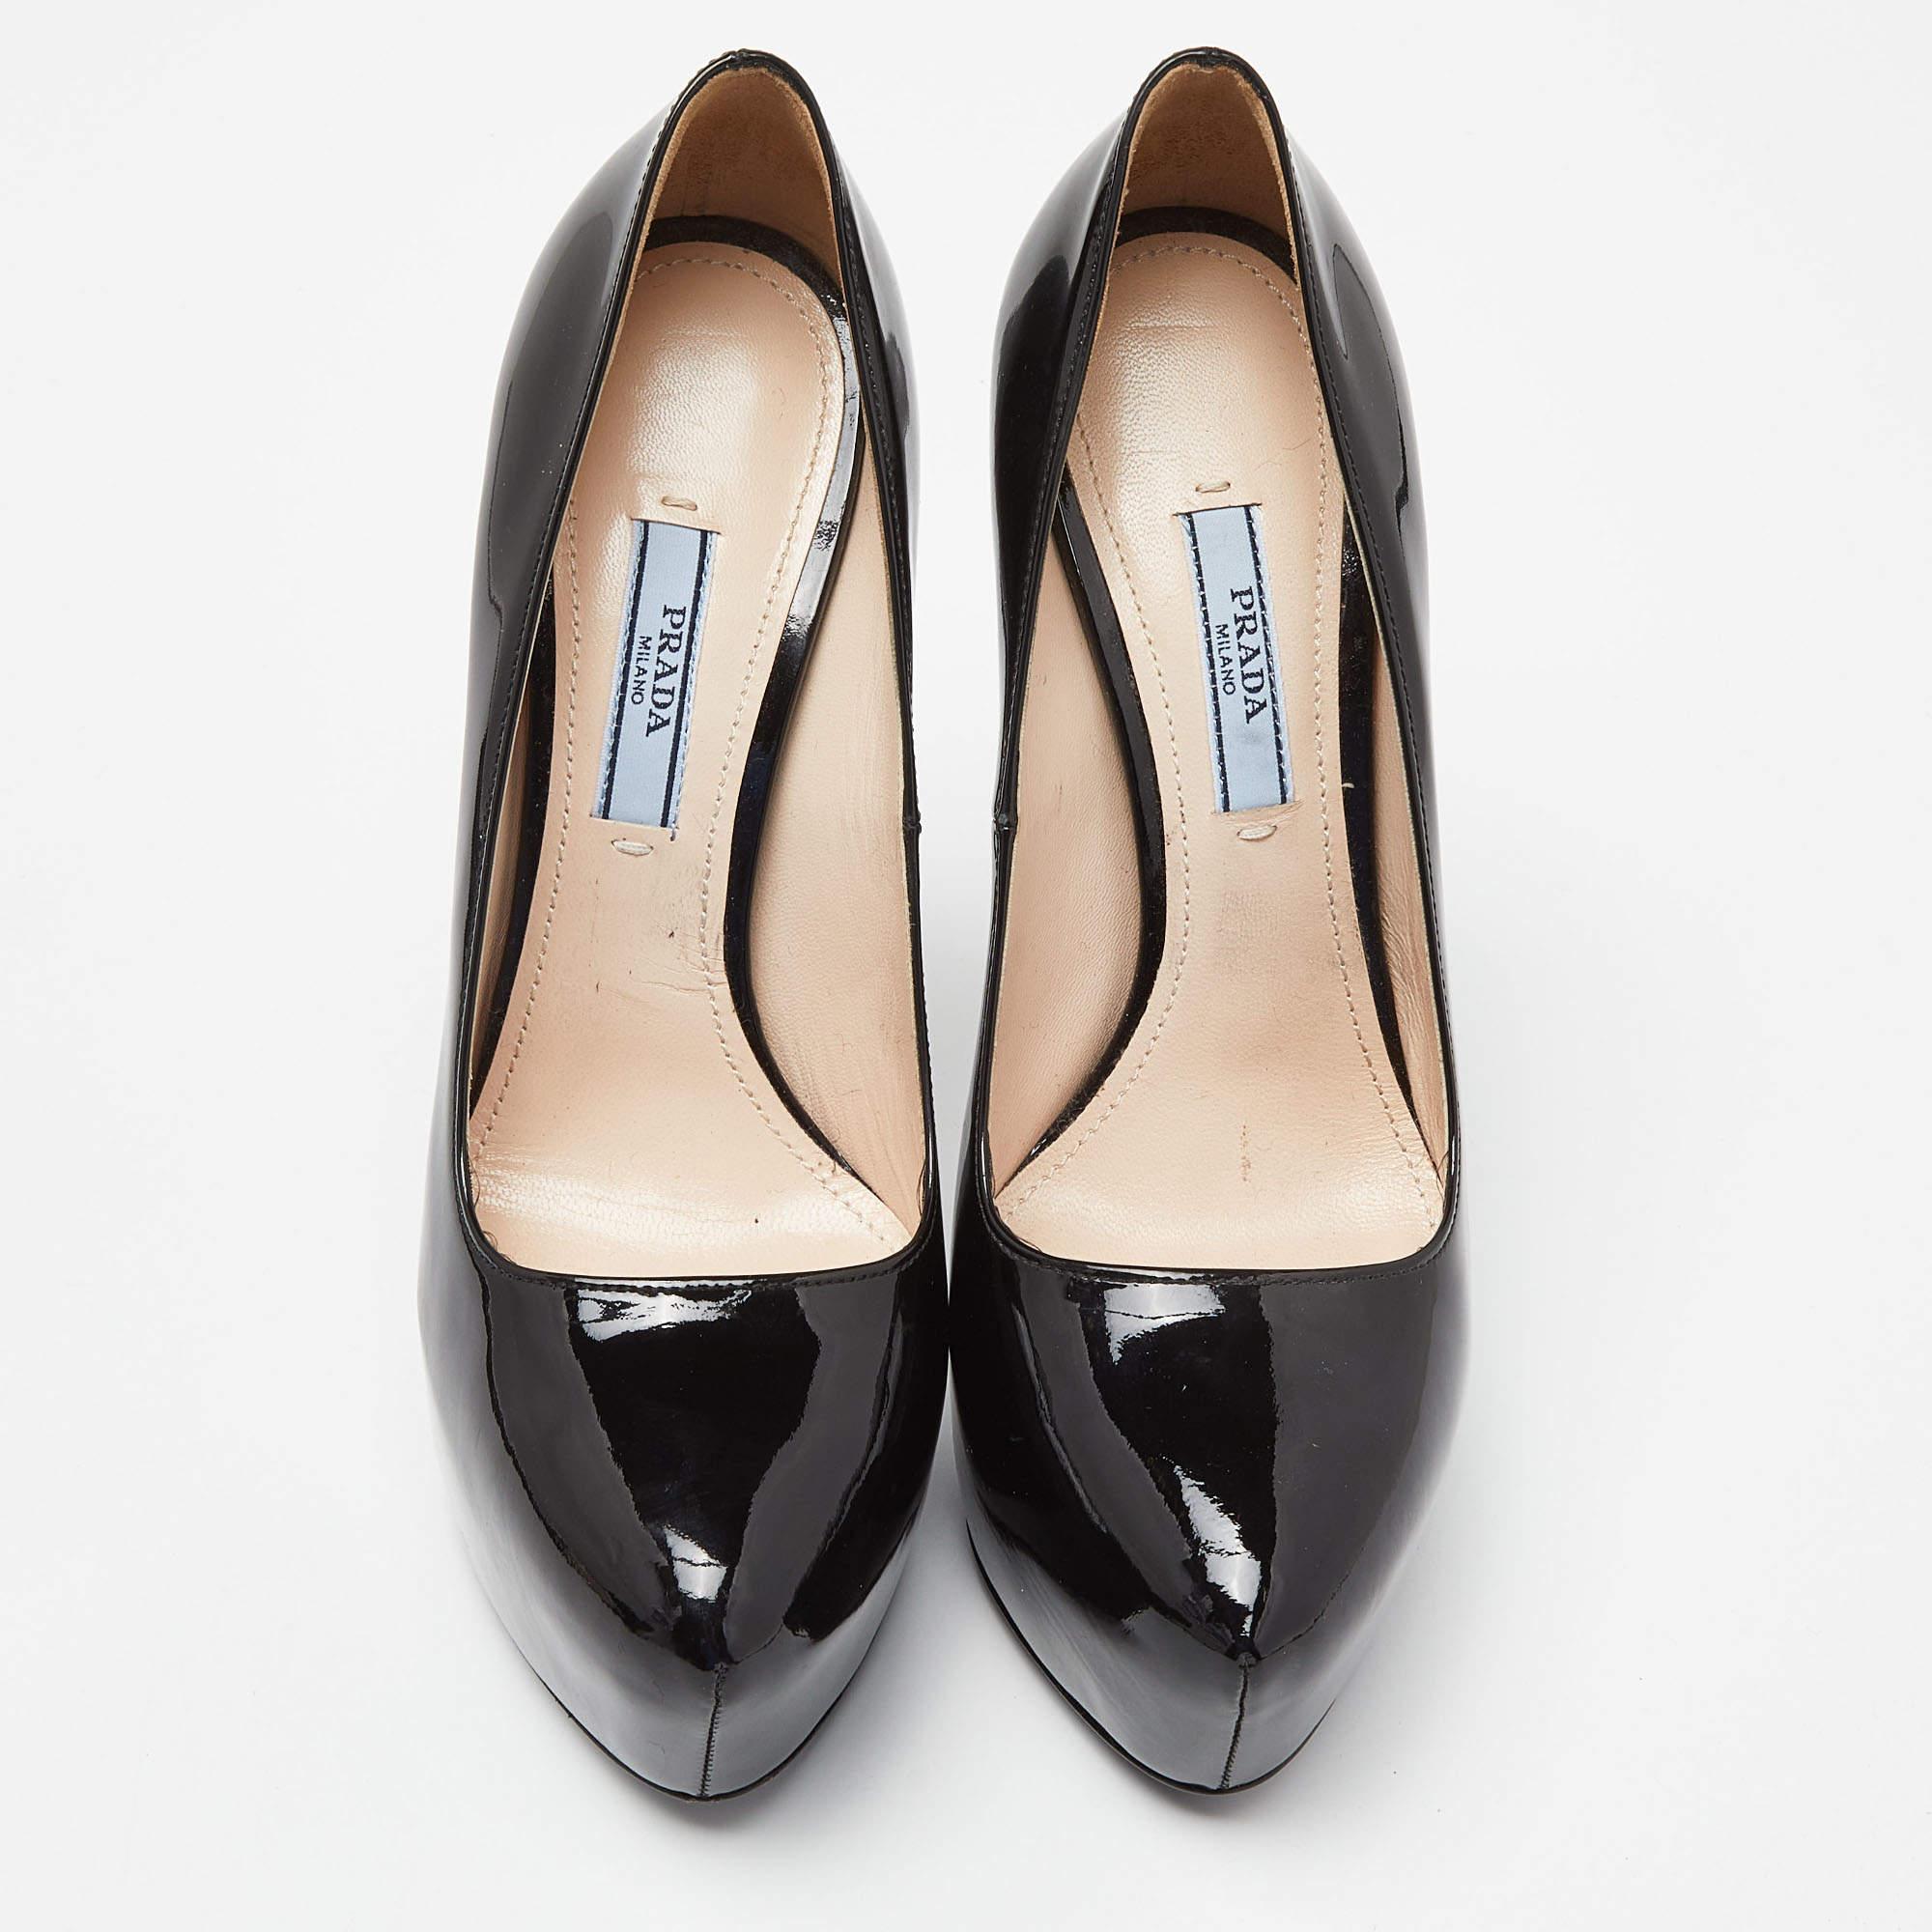 These pumps from Prada are meant to be a loved choice. Wonderfully crafted from patent leather, and balanced on platforms and 15 cm heels, the black pumps are high in both style and comfort.

